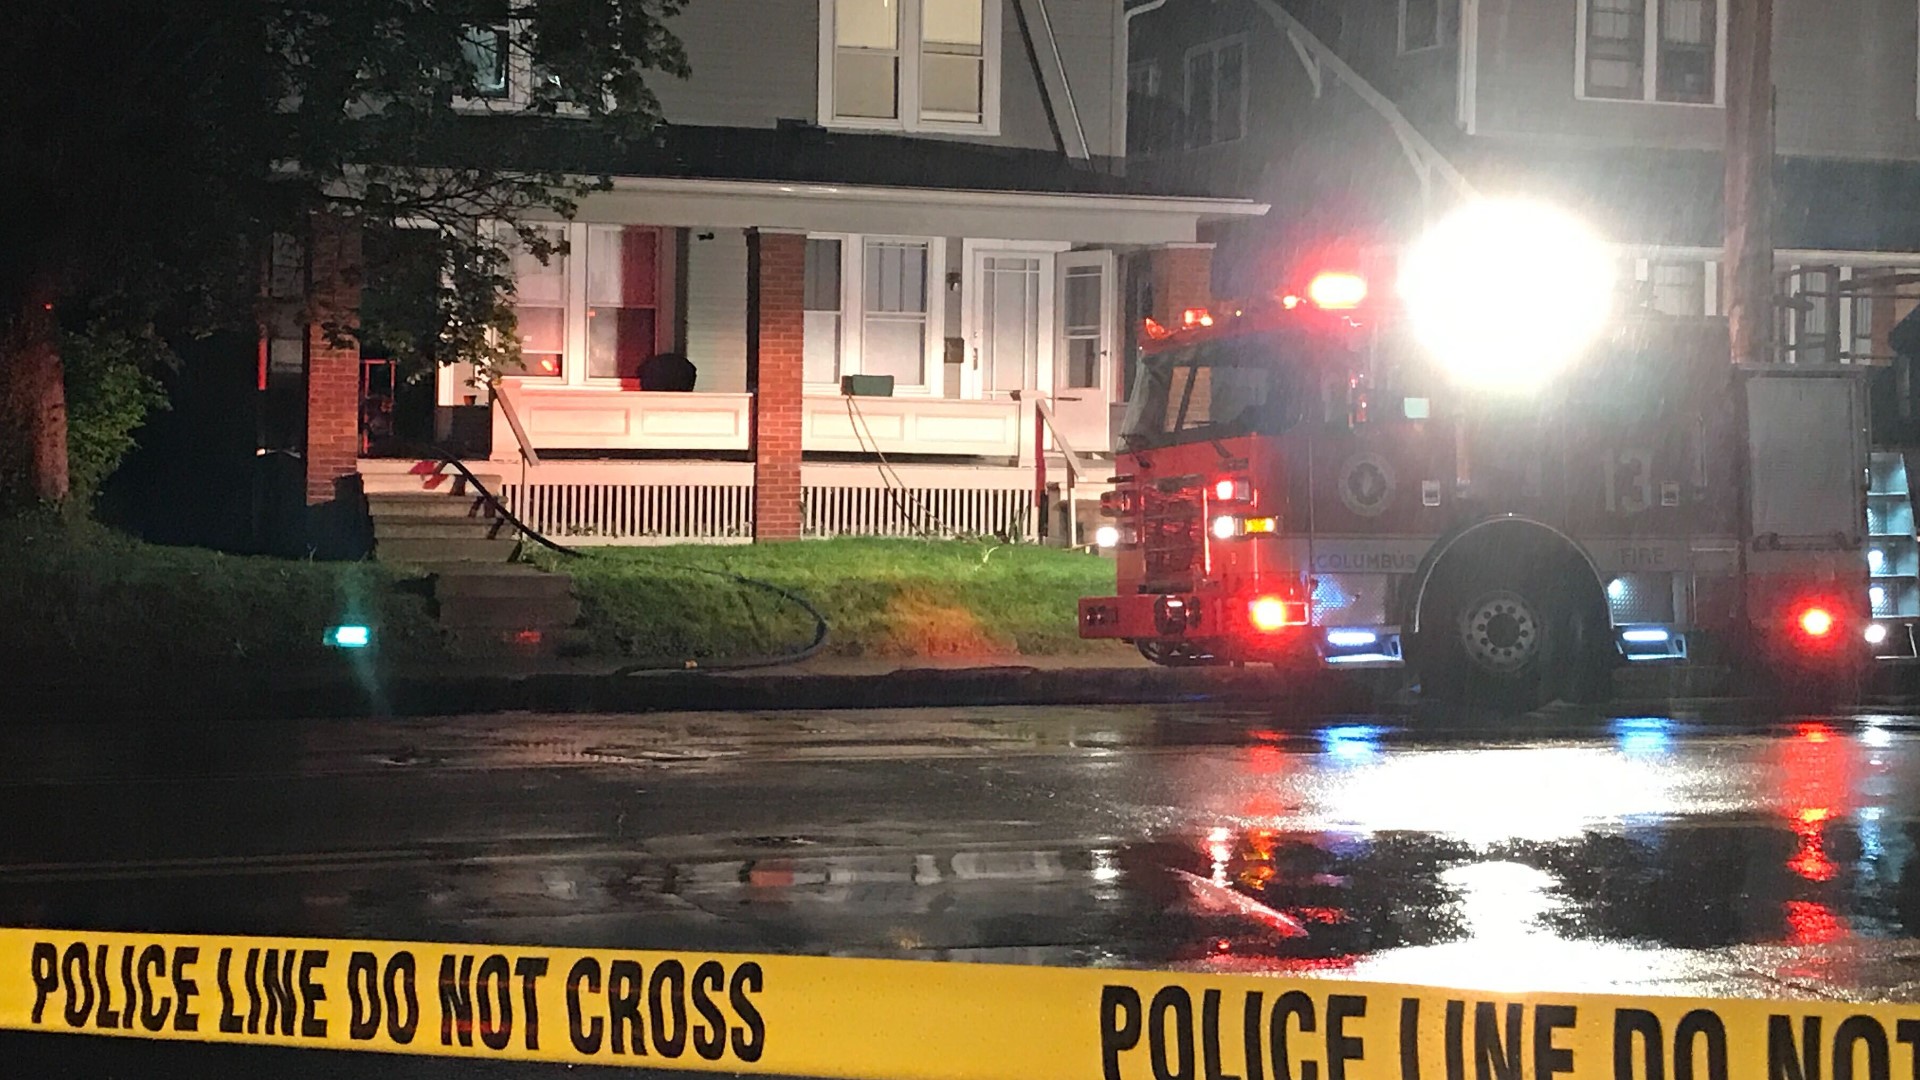 A woman was taken to a hospital in critical condition after a fire at a home on Indianola Avenue in Clintonville Monday morning.